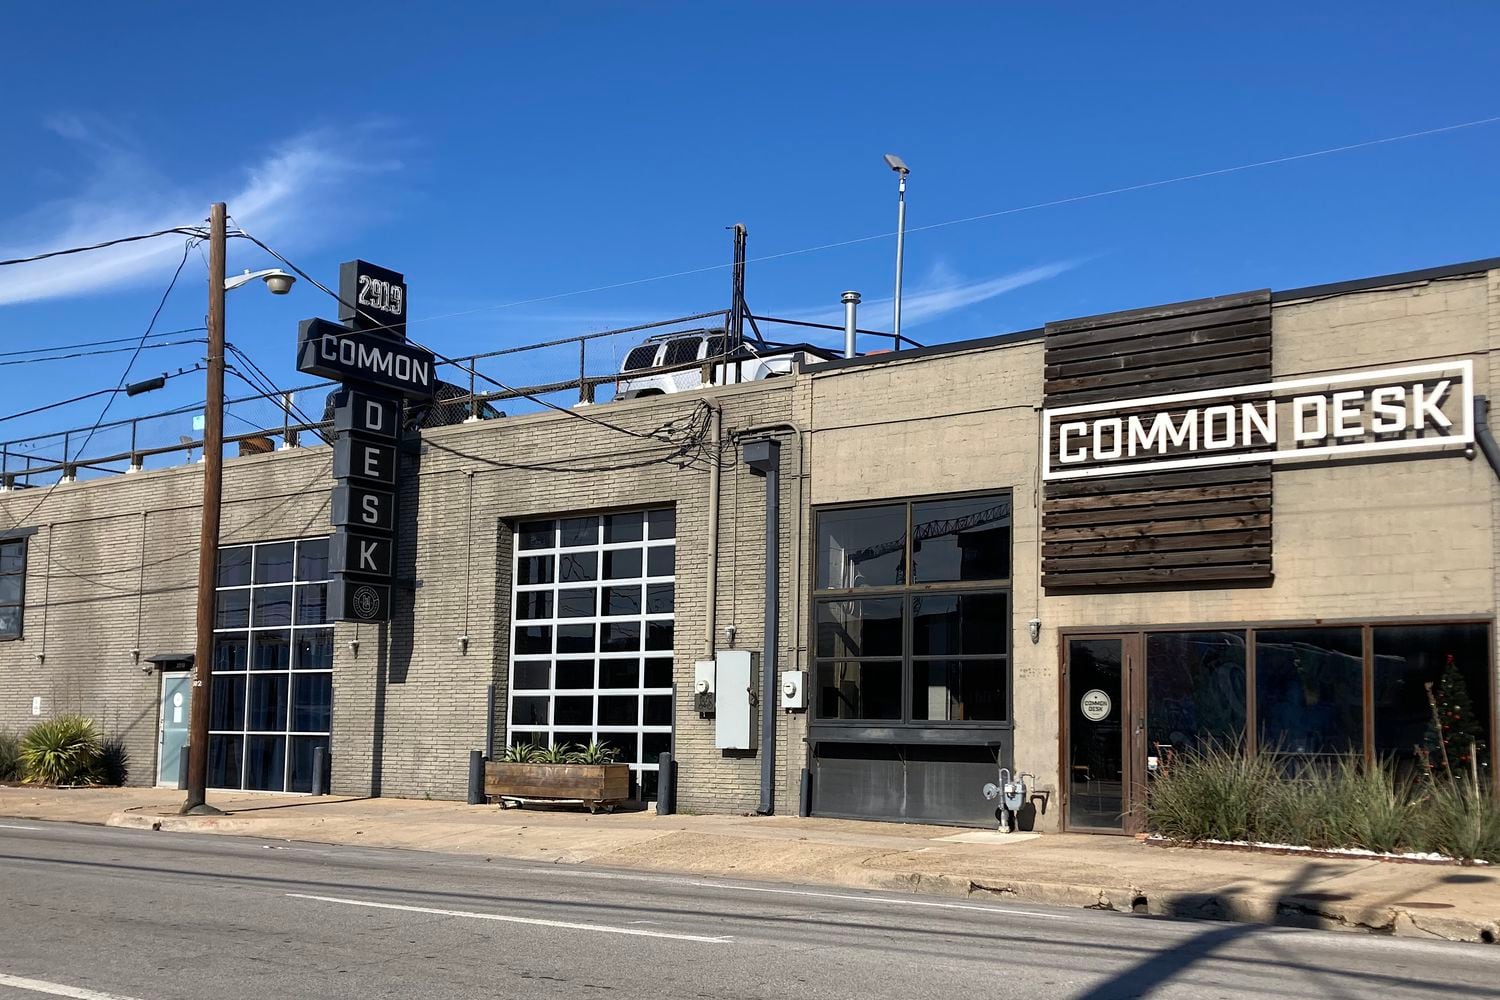 Common Desk has operated the Deep Ellum location for more than a decade.